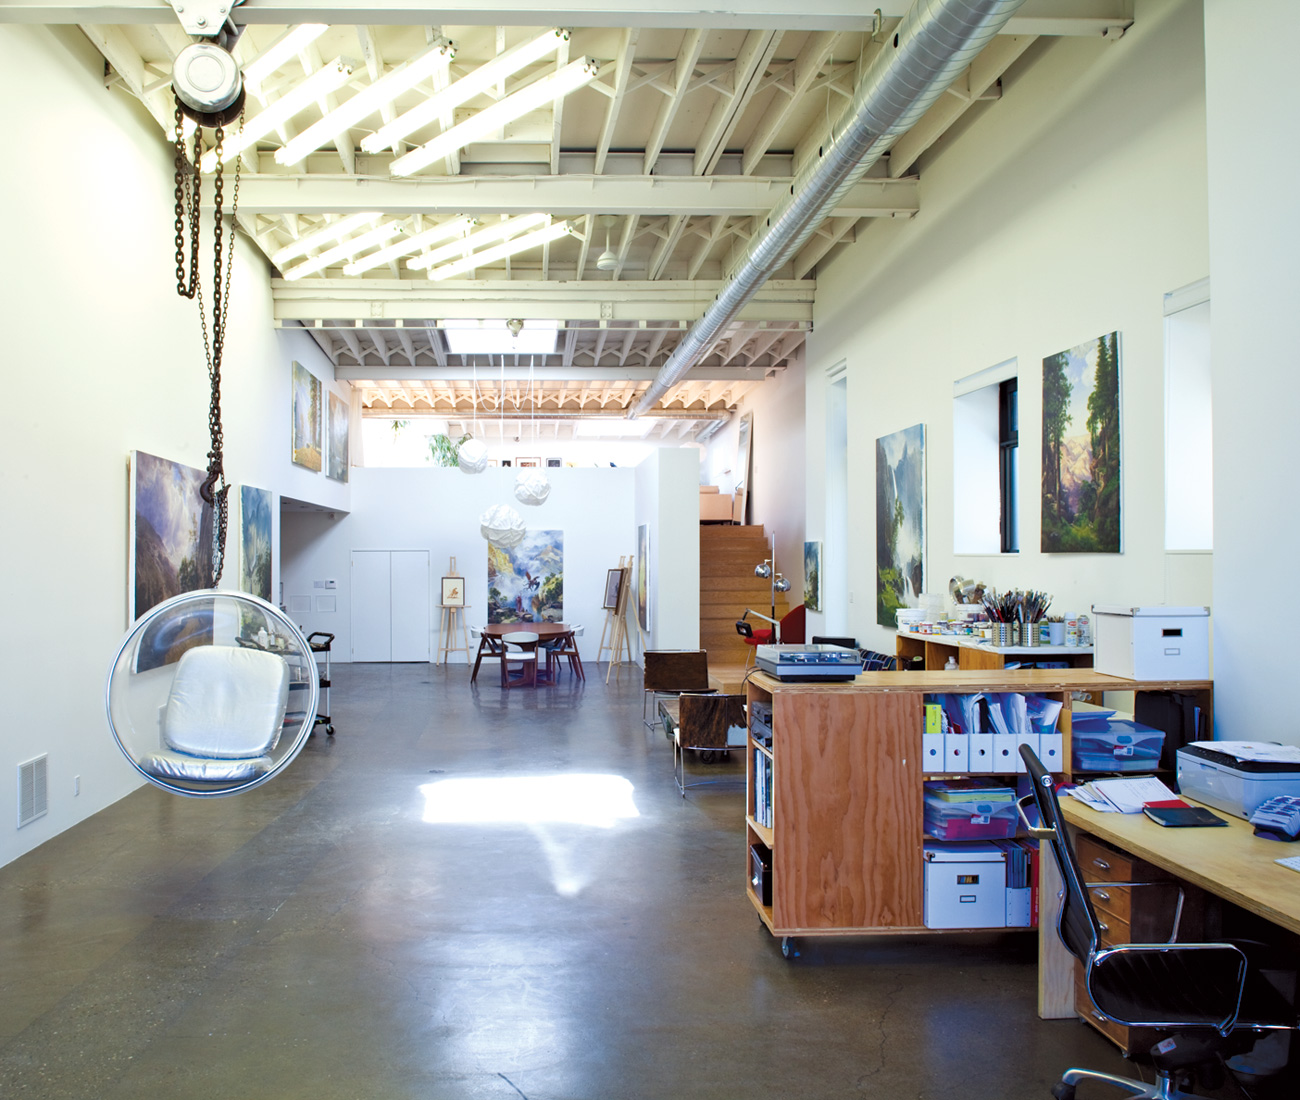 A 1960s-style bubble chair is suspended from an industrial winch, and Monkman’s painted landscapes hang throughout the studio.